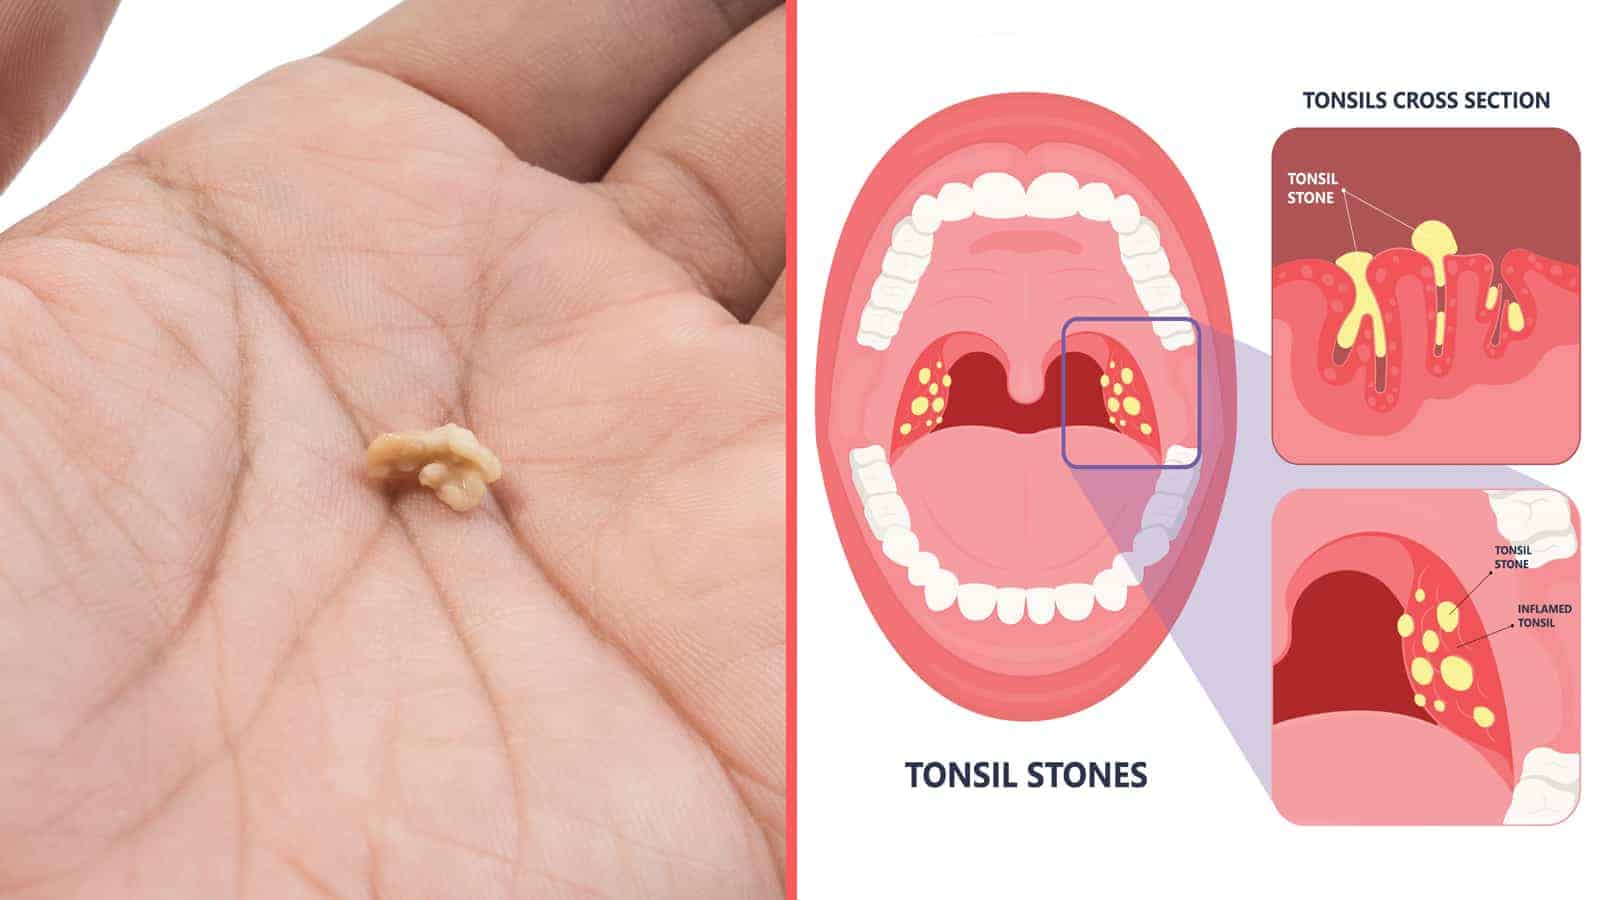 4 Things That Cause Tonsil Stones (And How to Prevent Them)